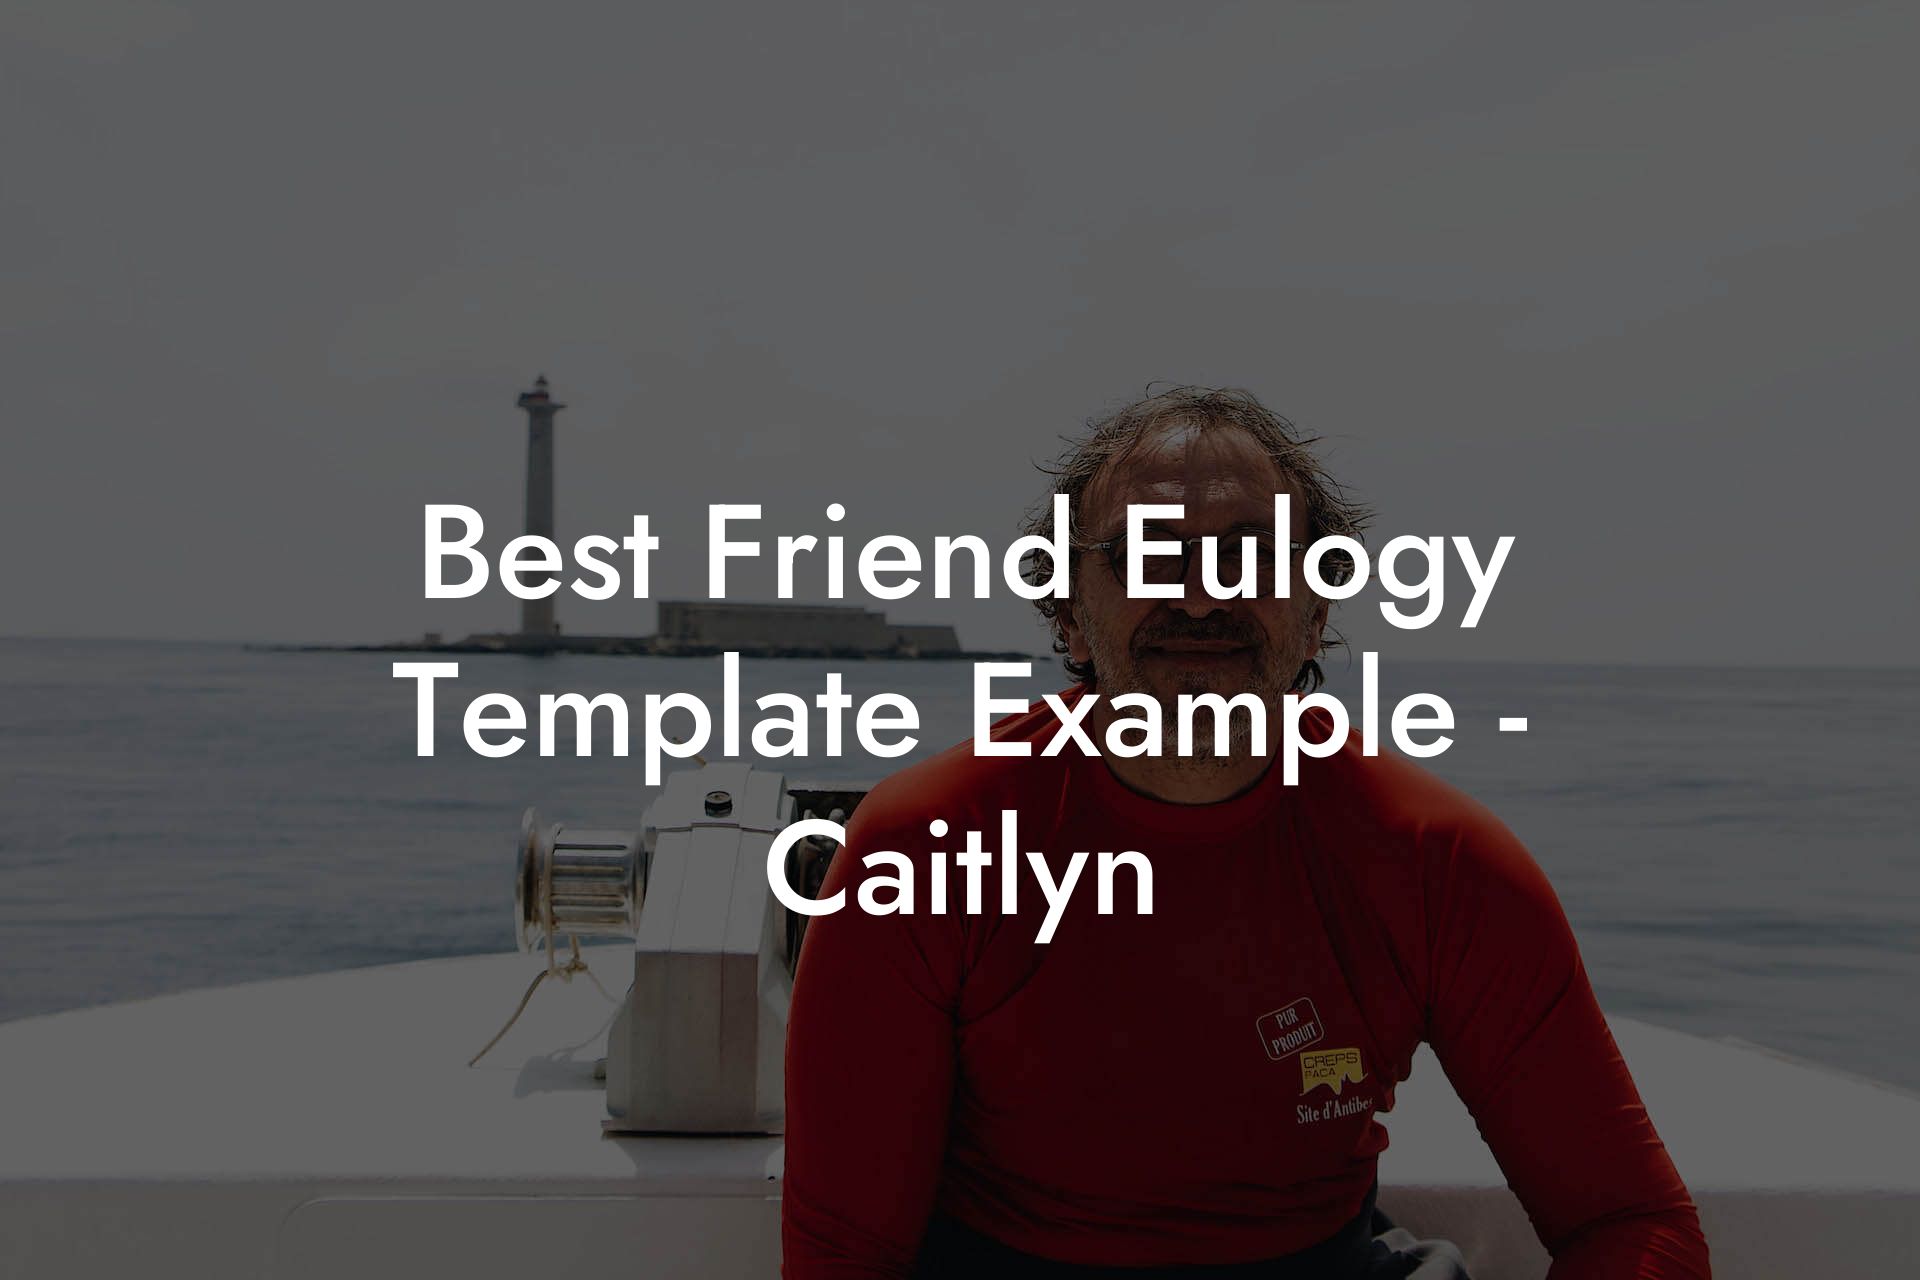 Best Friend Eulogy Template Example - Caitlyn